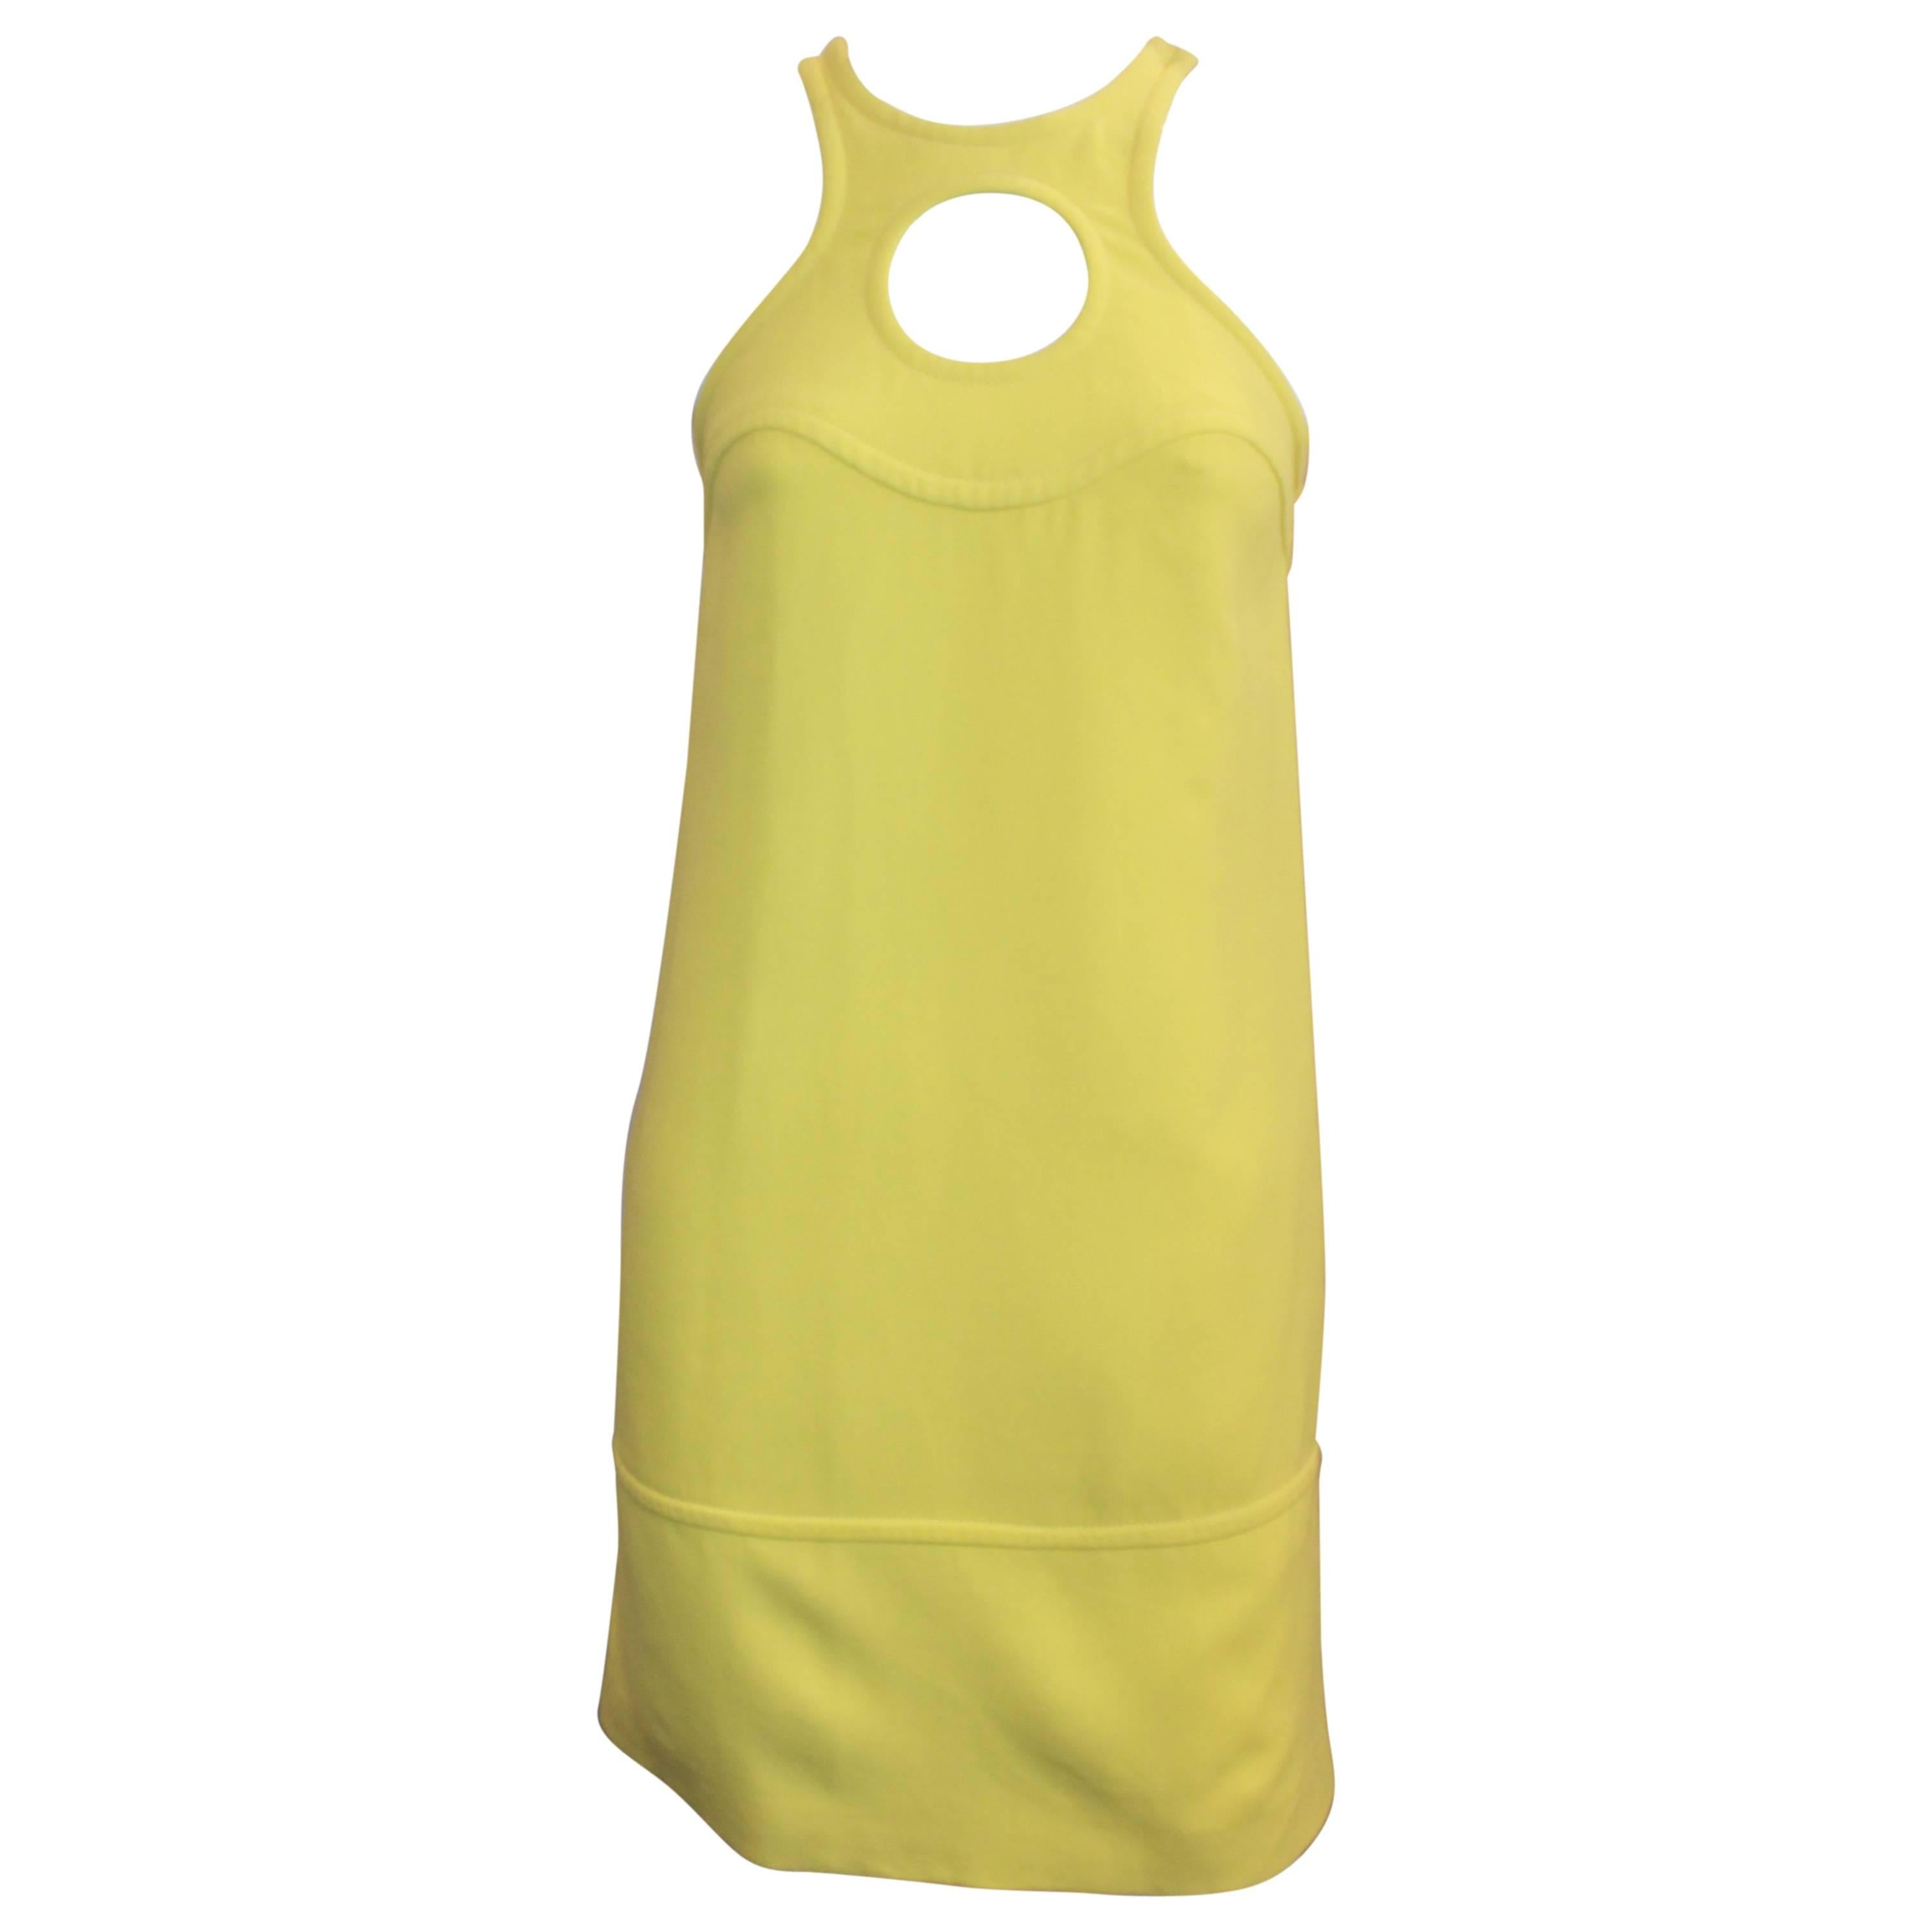 Emilio Pucci New Yellow Halter Dress with Keyhole - 38